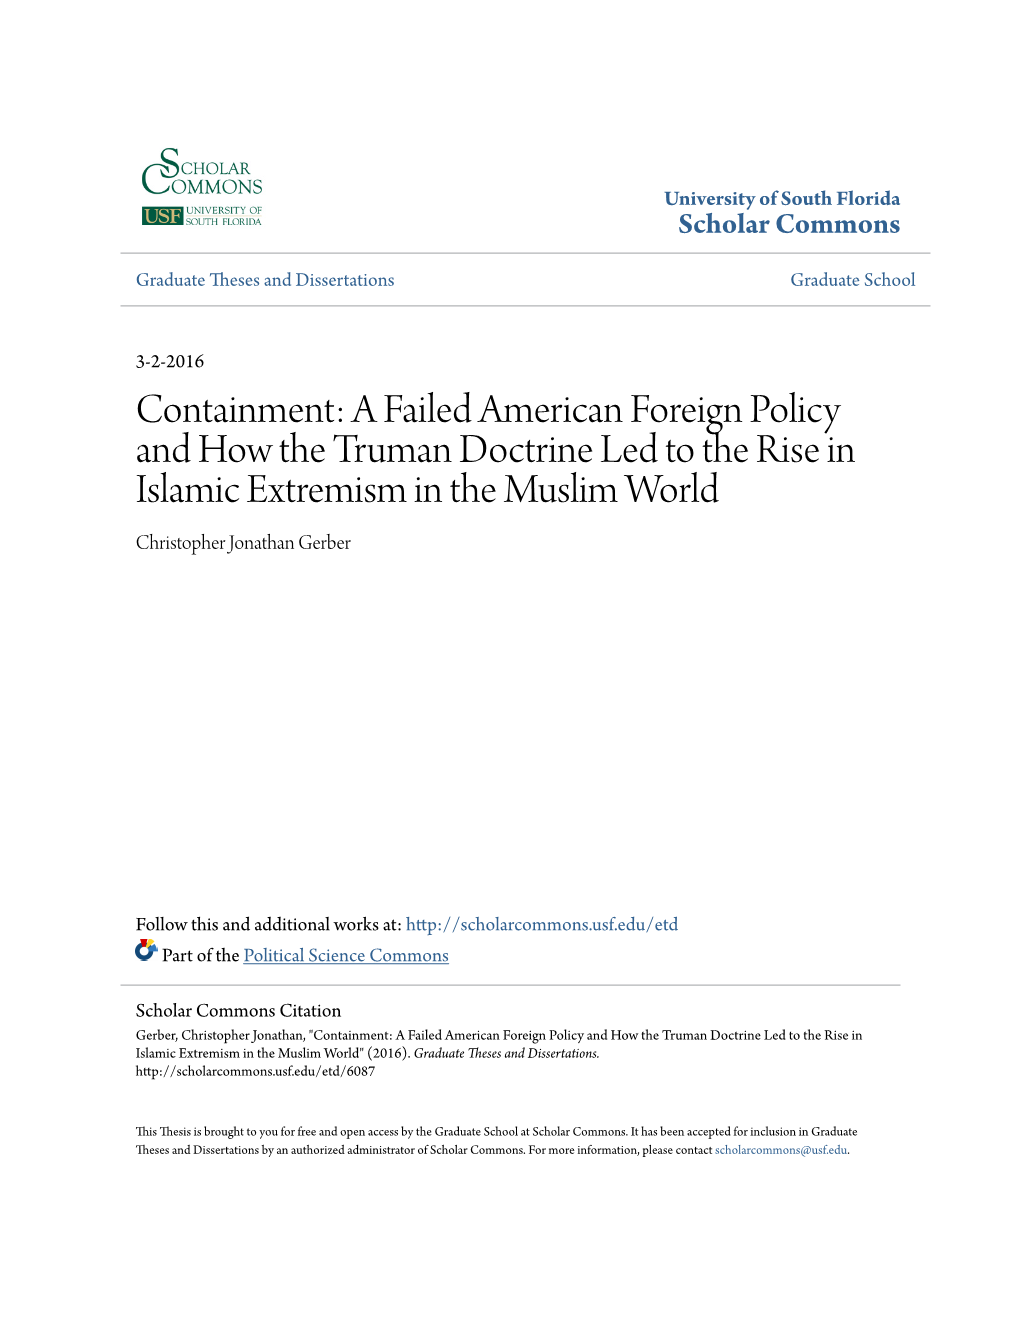 Containment: a Failed American Foreign Policy and How the Truman Doctrine Led to the Rise in Islamic Extremism in the Muslim World Christopher Jonathan Gerber